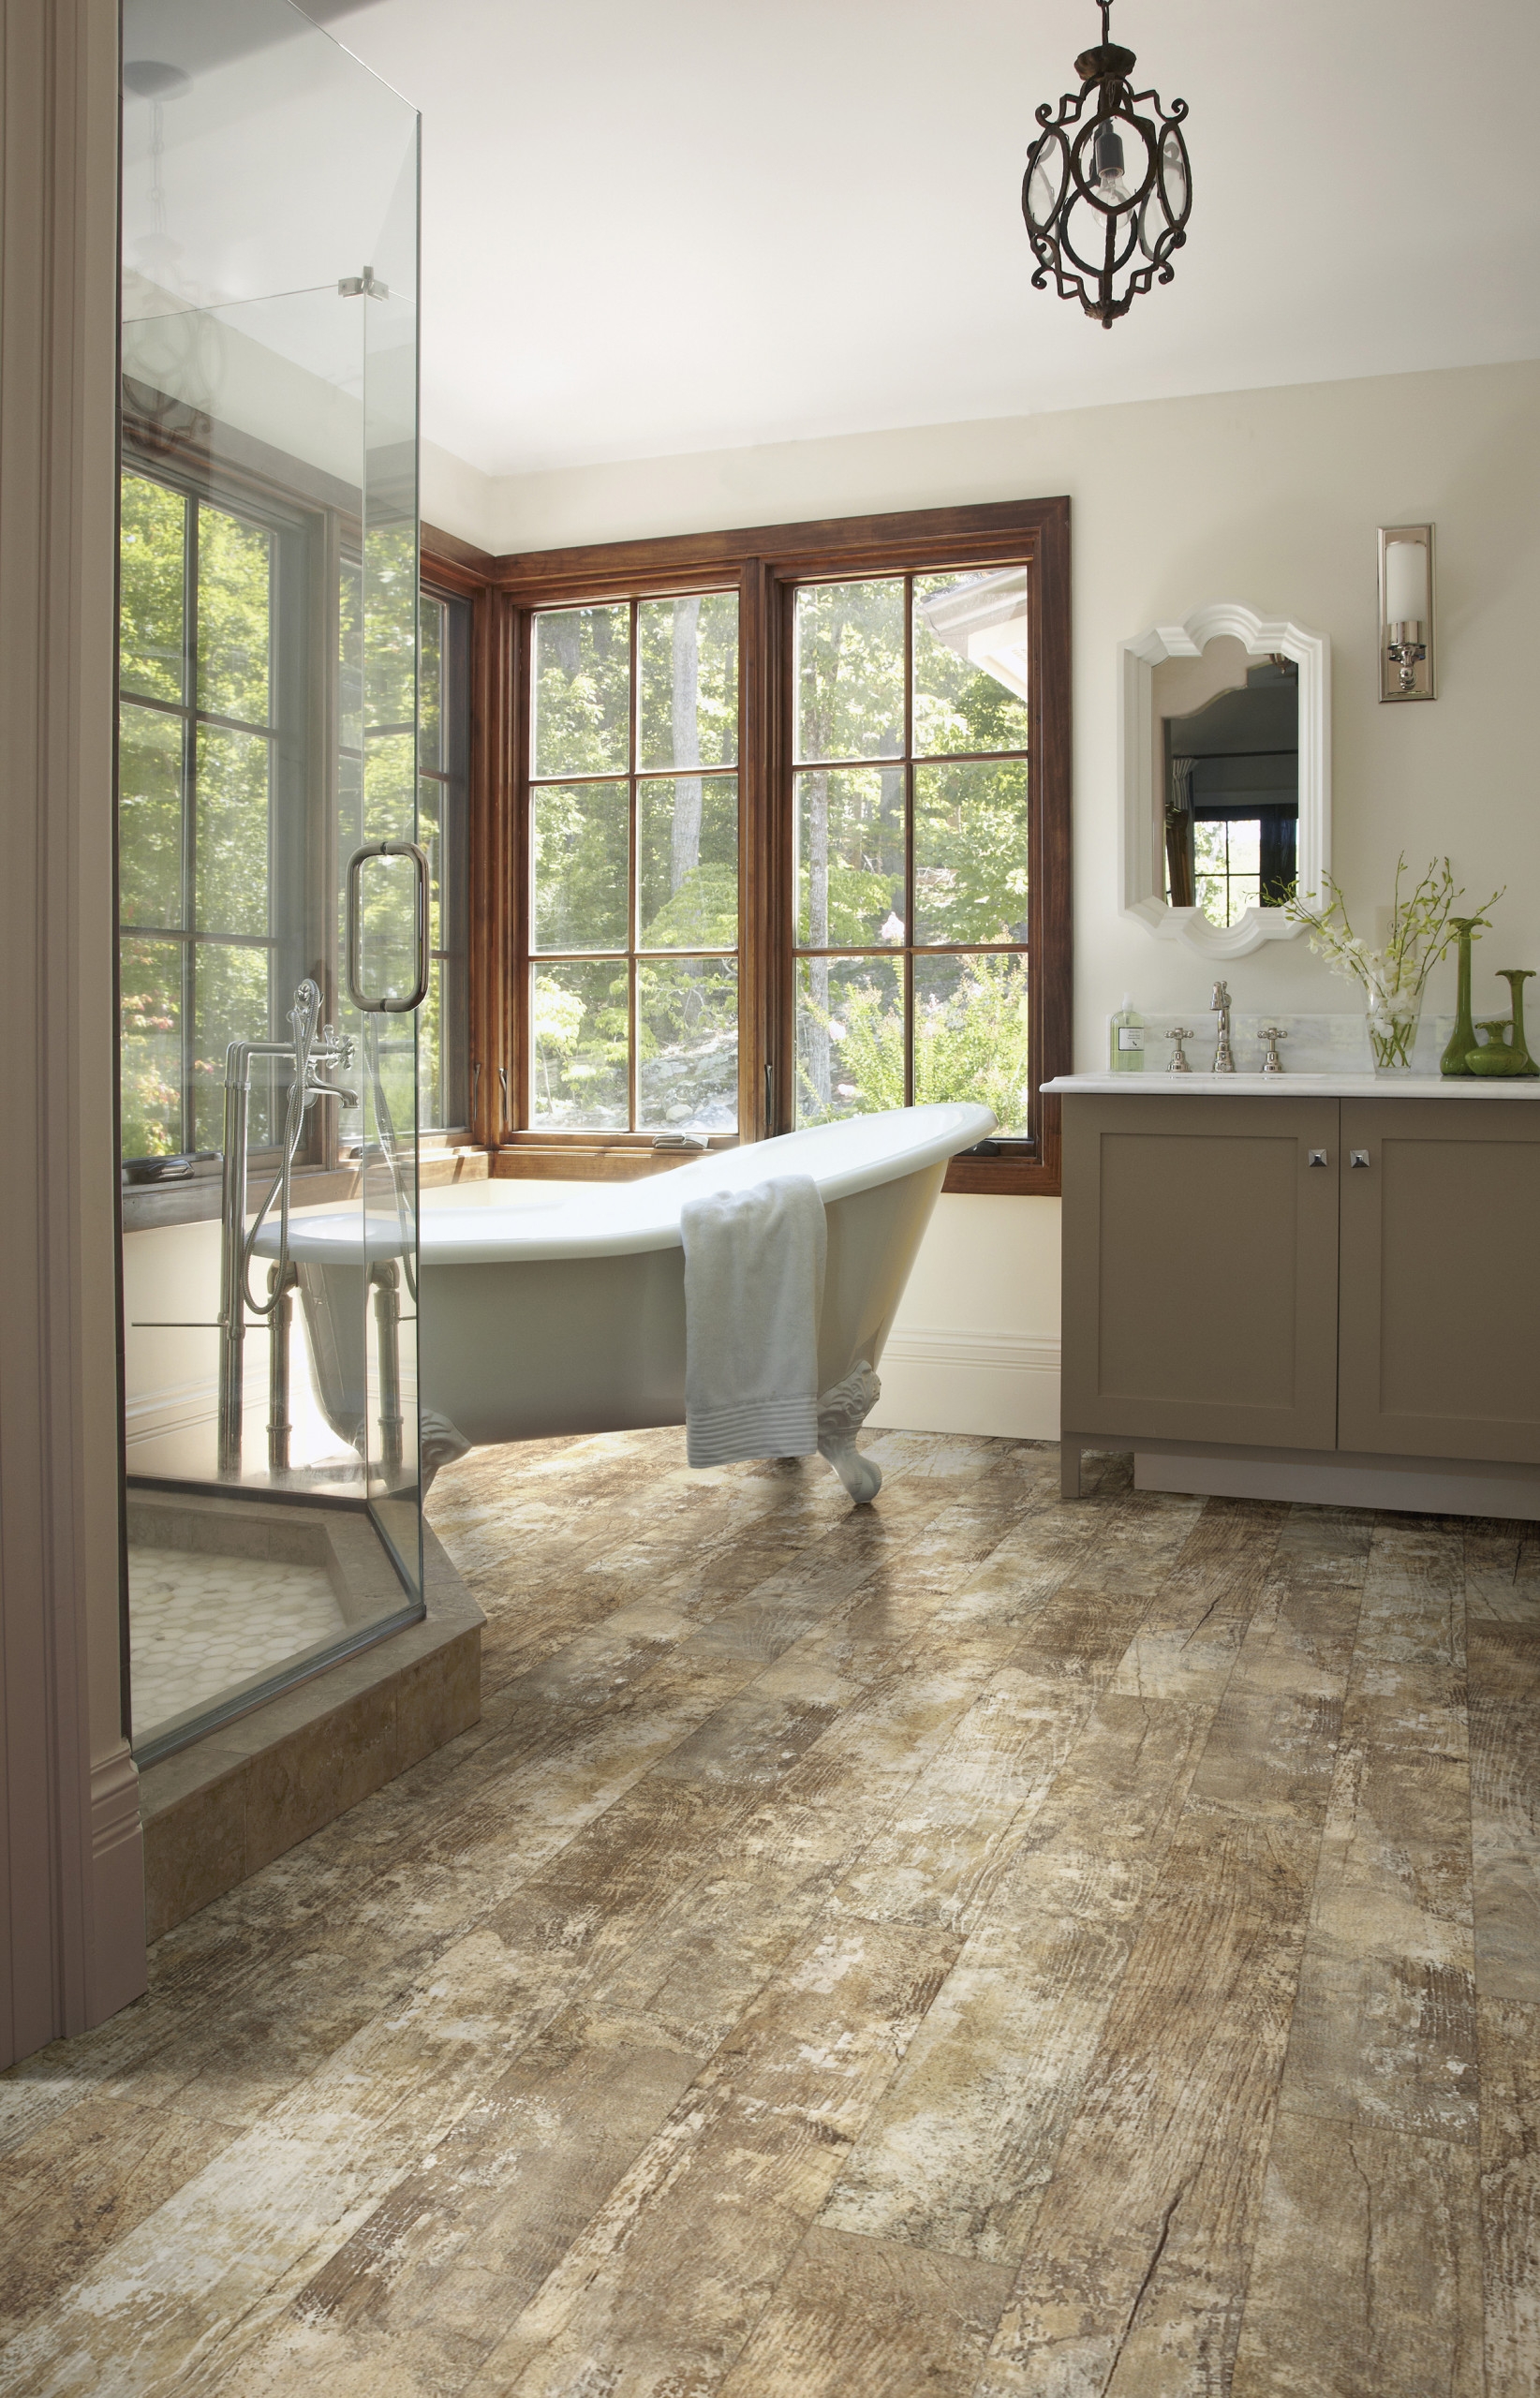 Shaw Flooring Gallery - Rustic - Bathroom - Houston - by Shans Carpets and Fine  Floor | Houzz